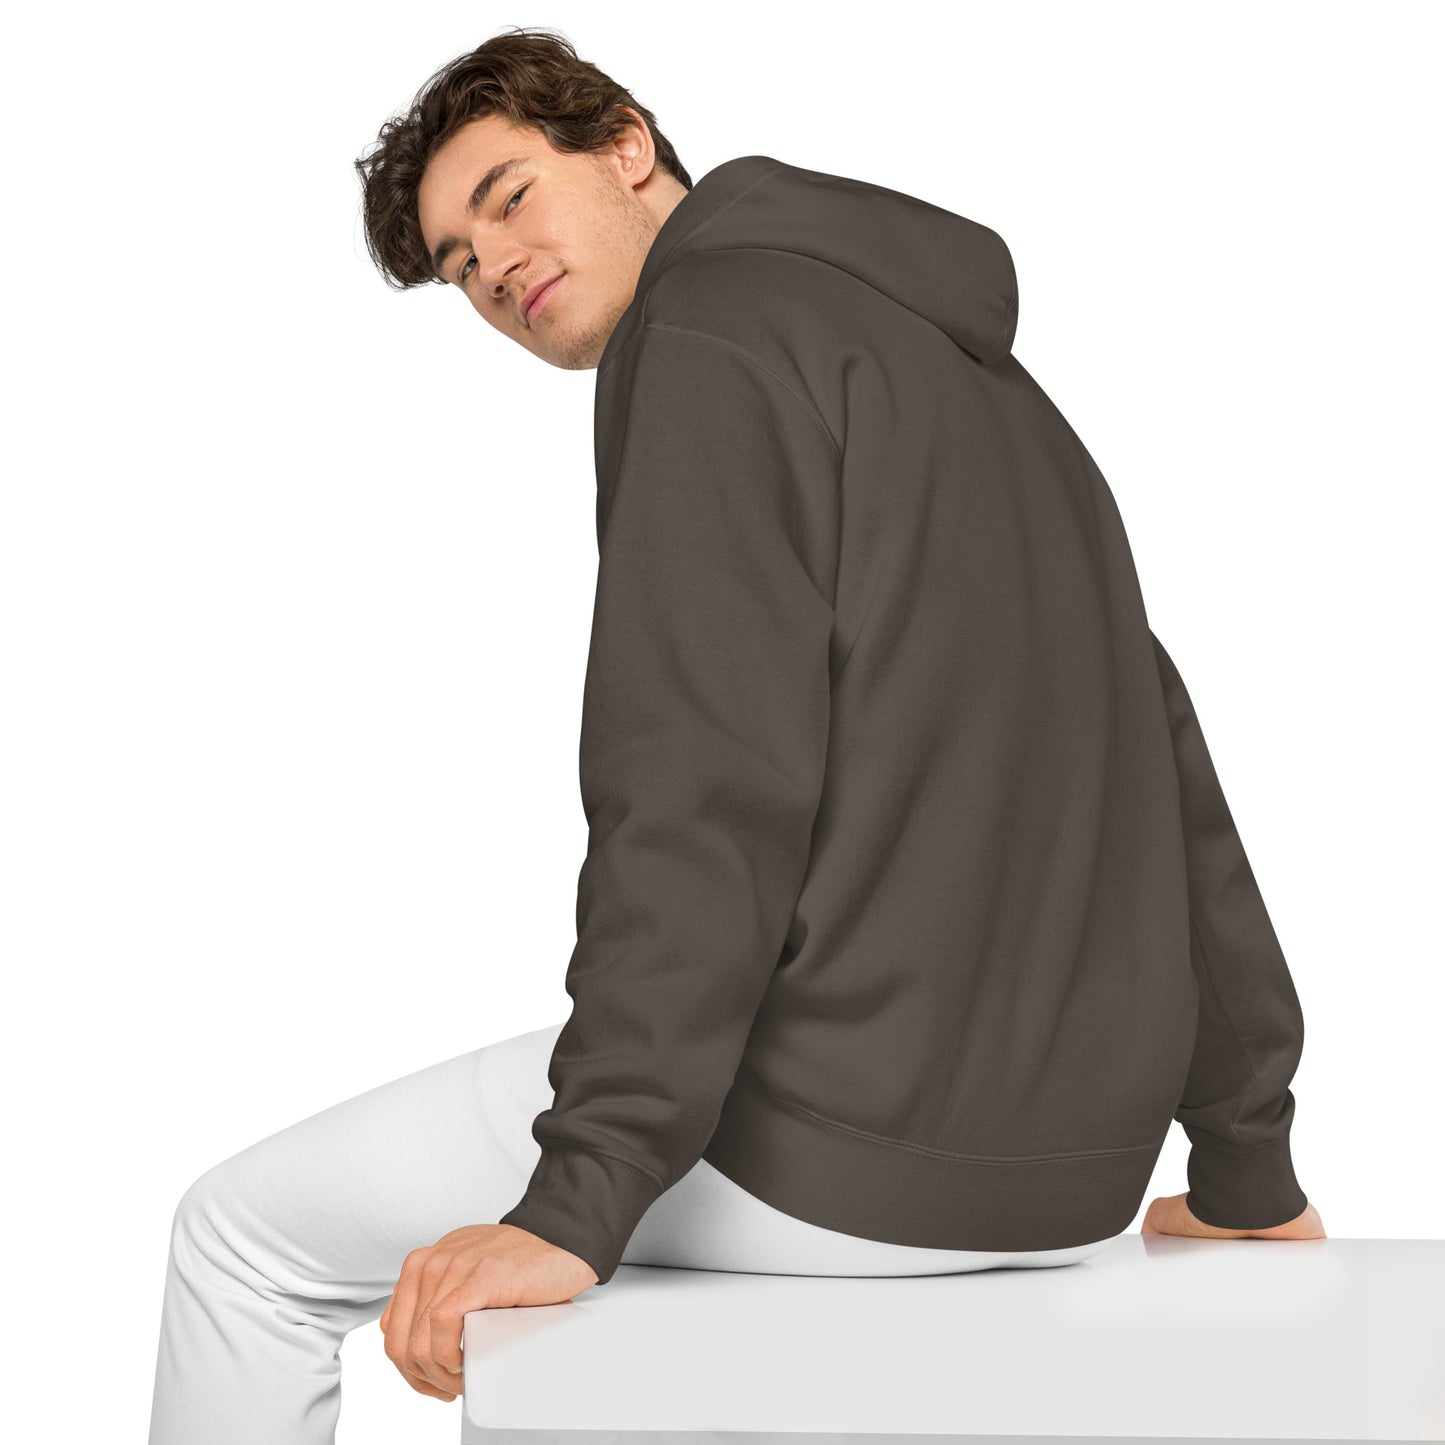 The Rational Comfy Hoodie